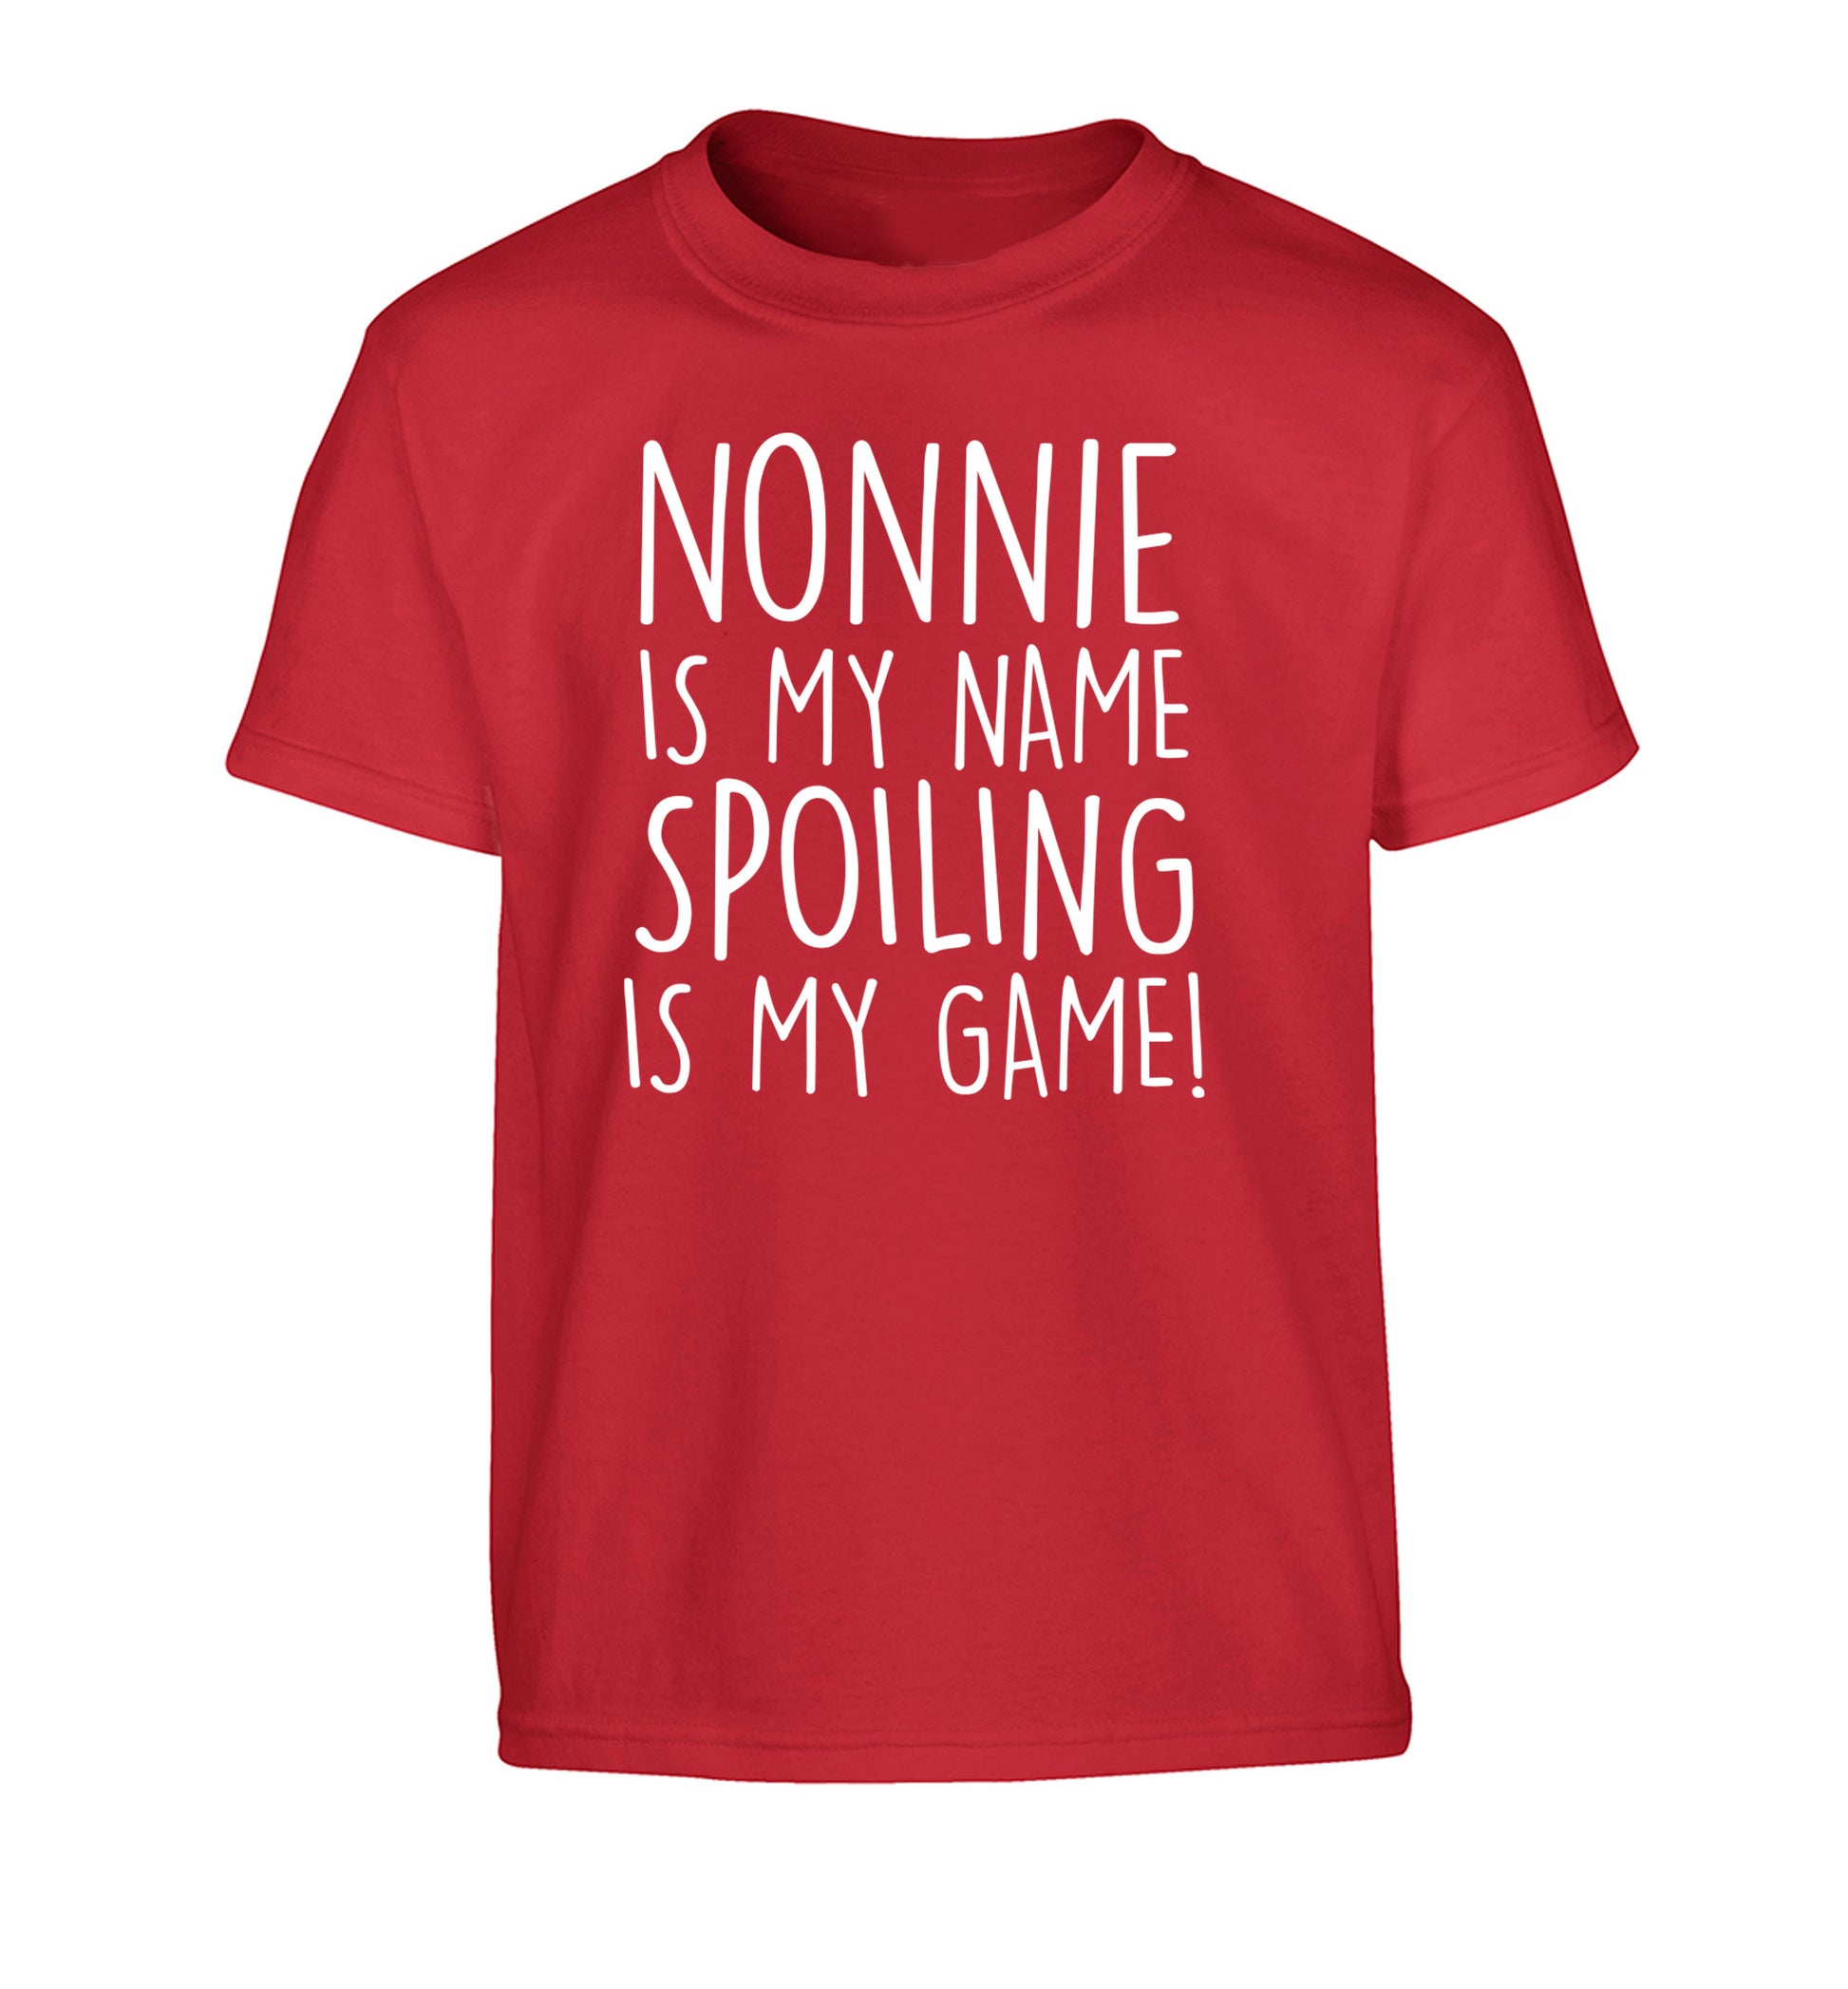 Nonnie is my name, spoiling is my game Children's red Tshirt 12-14 Years